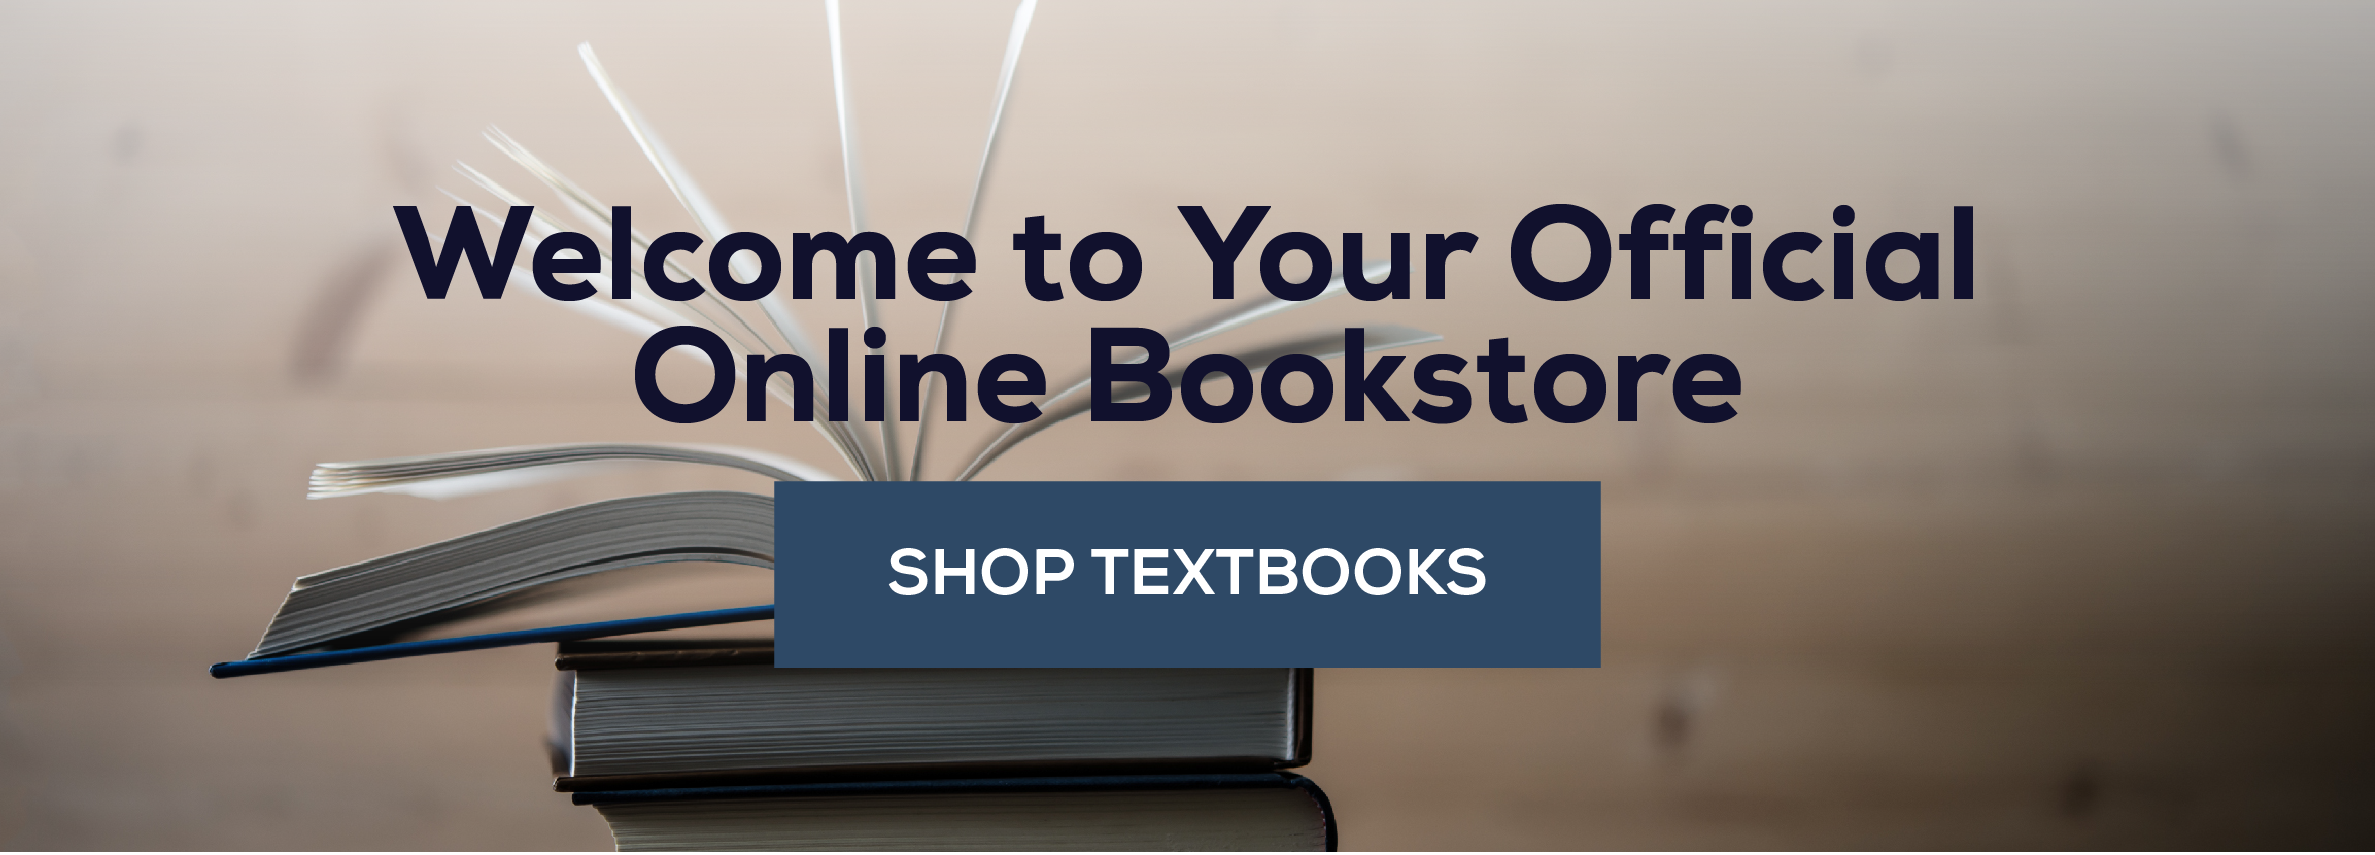 Welcome to your official online bookstore! Shop textbooks